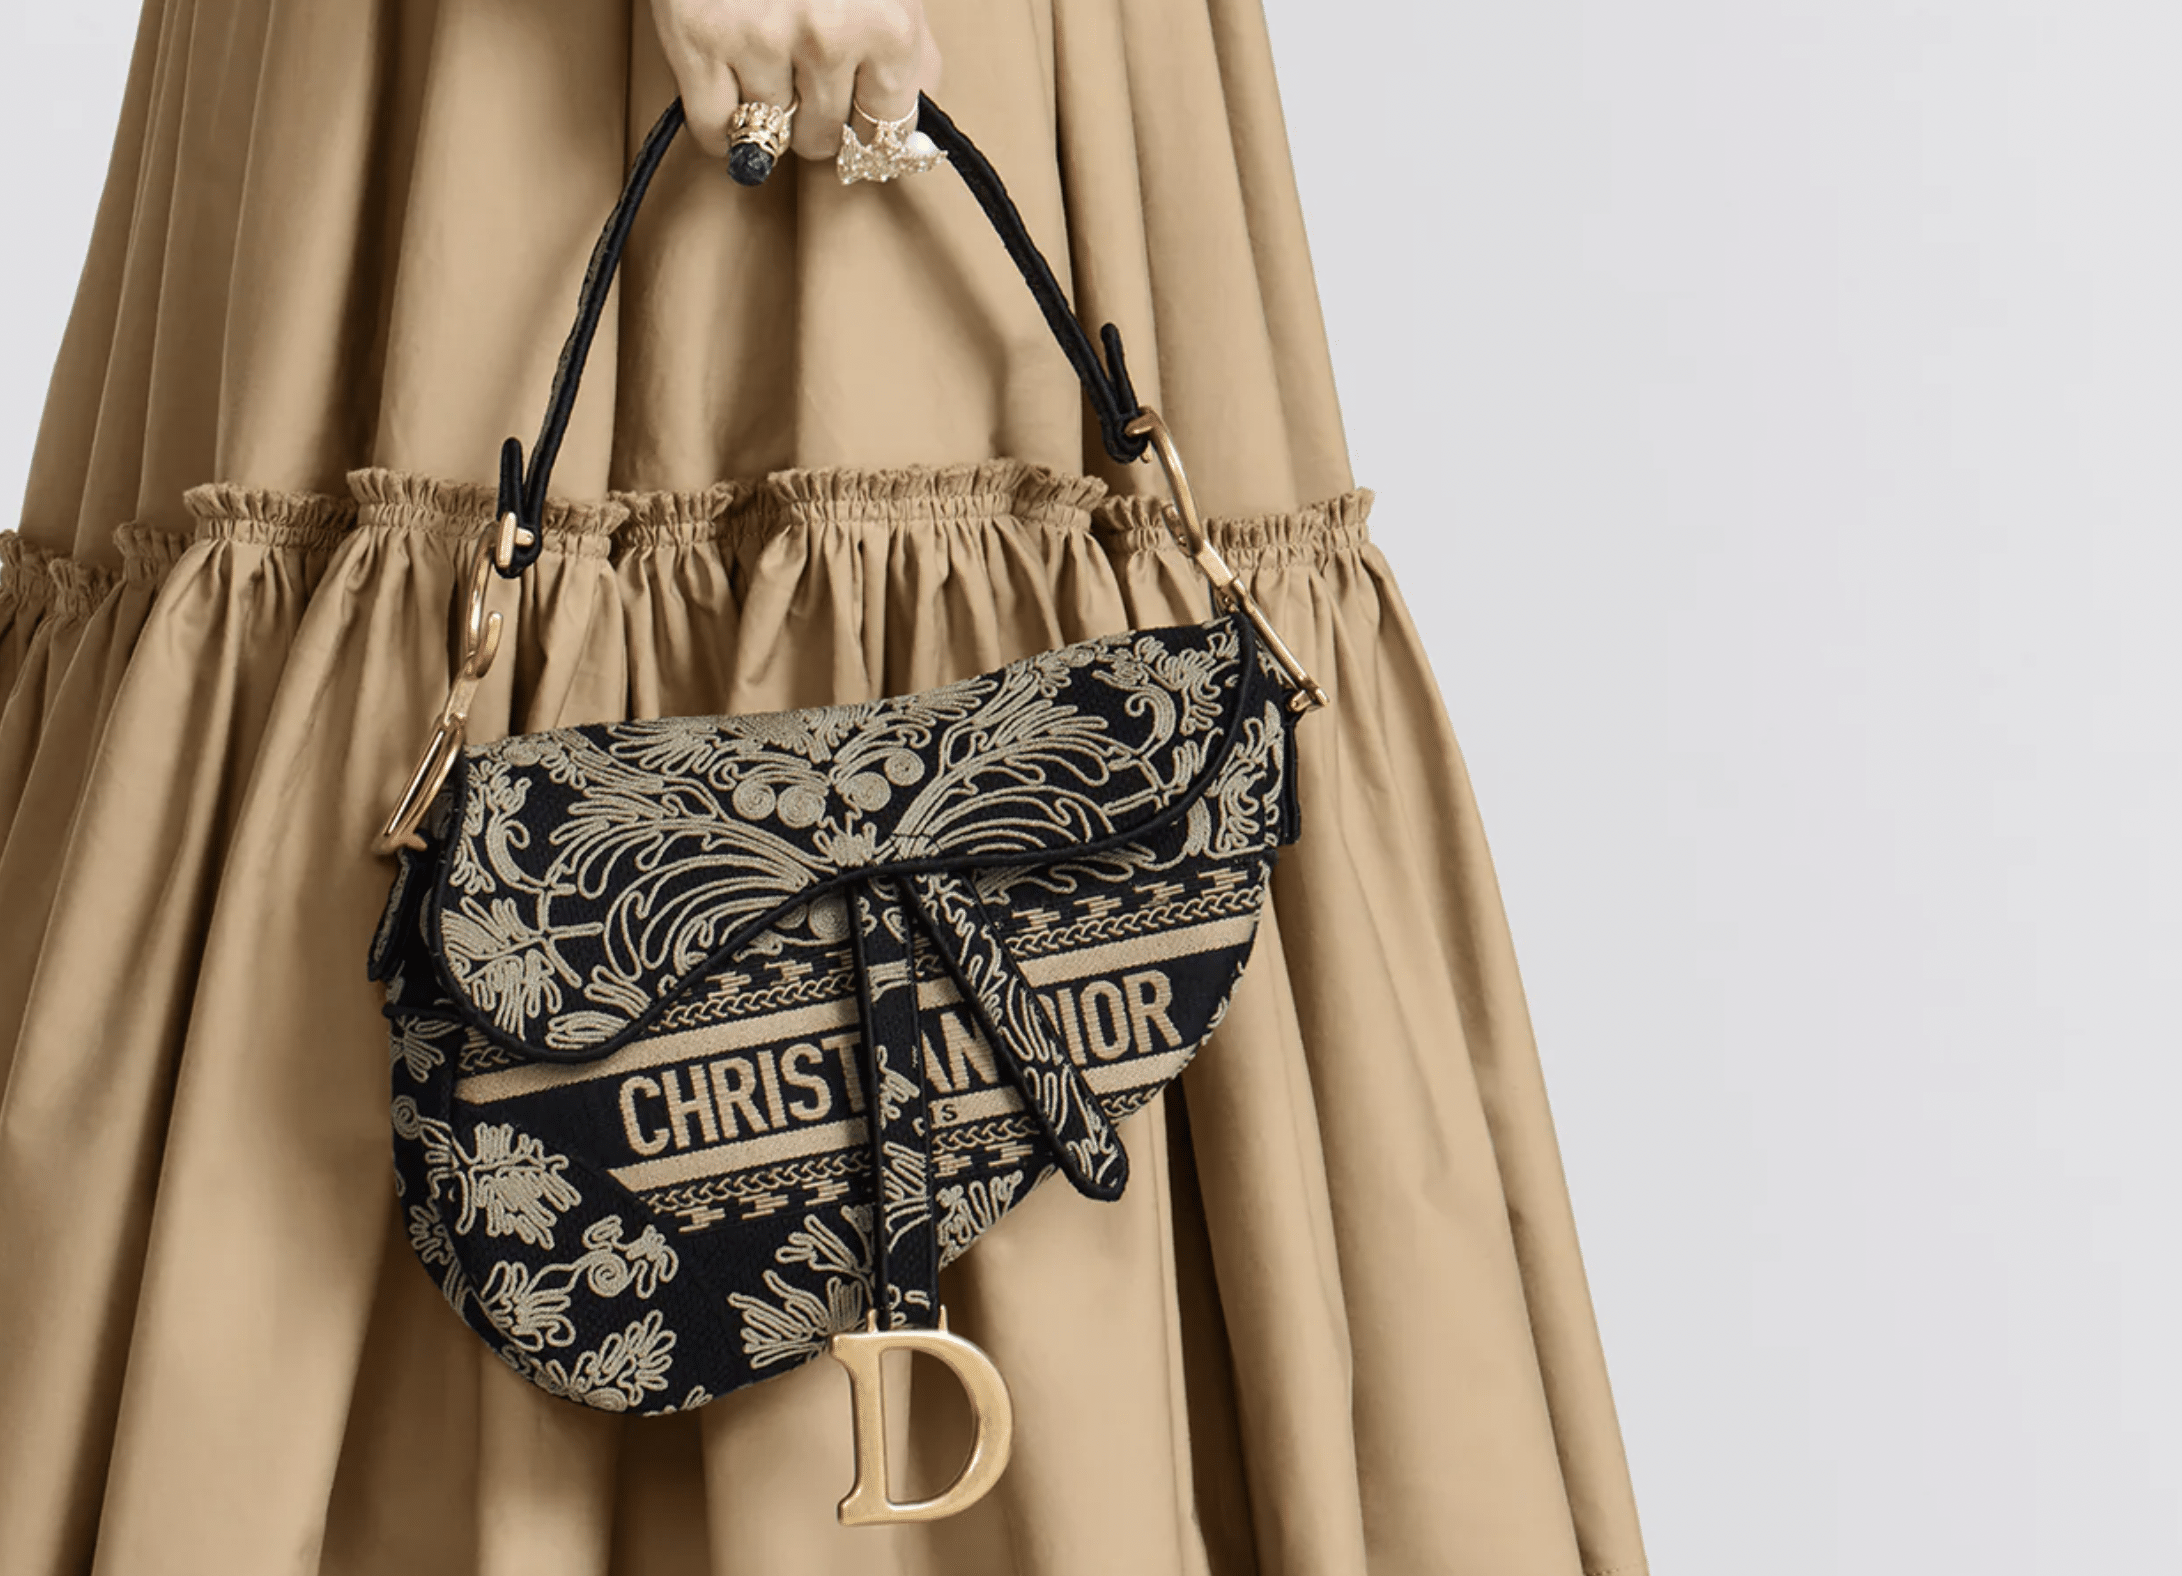 Read more about the article Dior Saddle Bag Review: History, Design, Price (Worth it?)